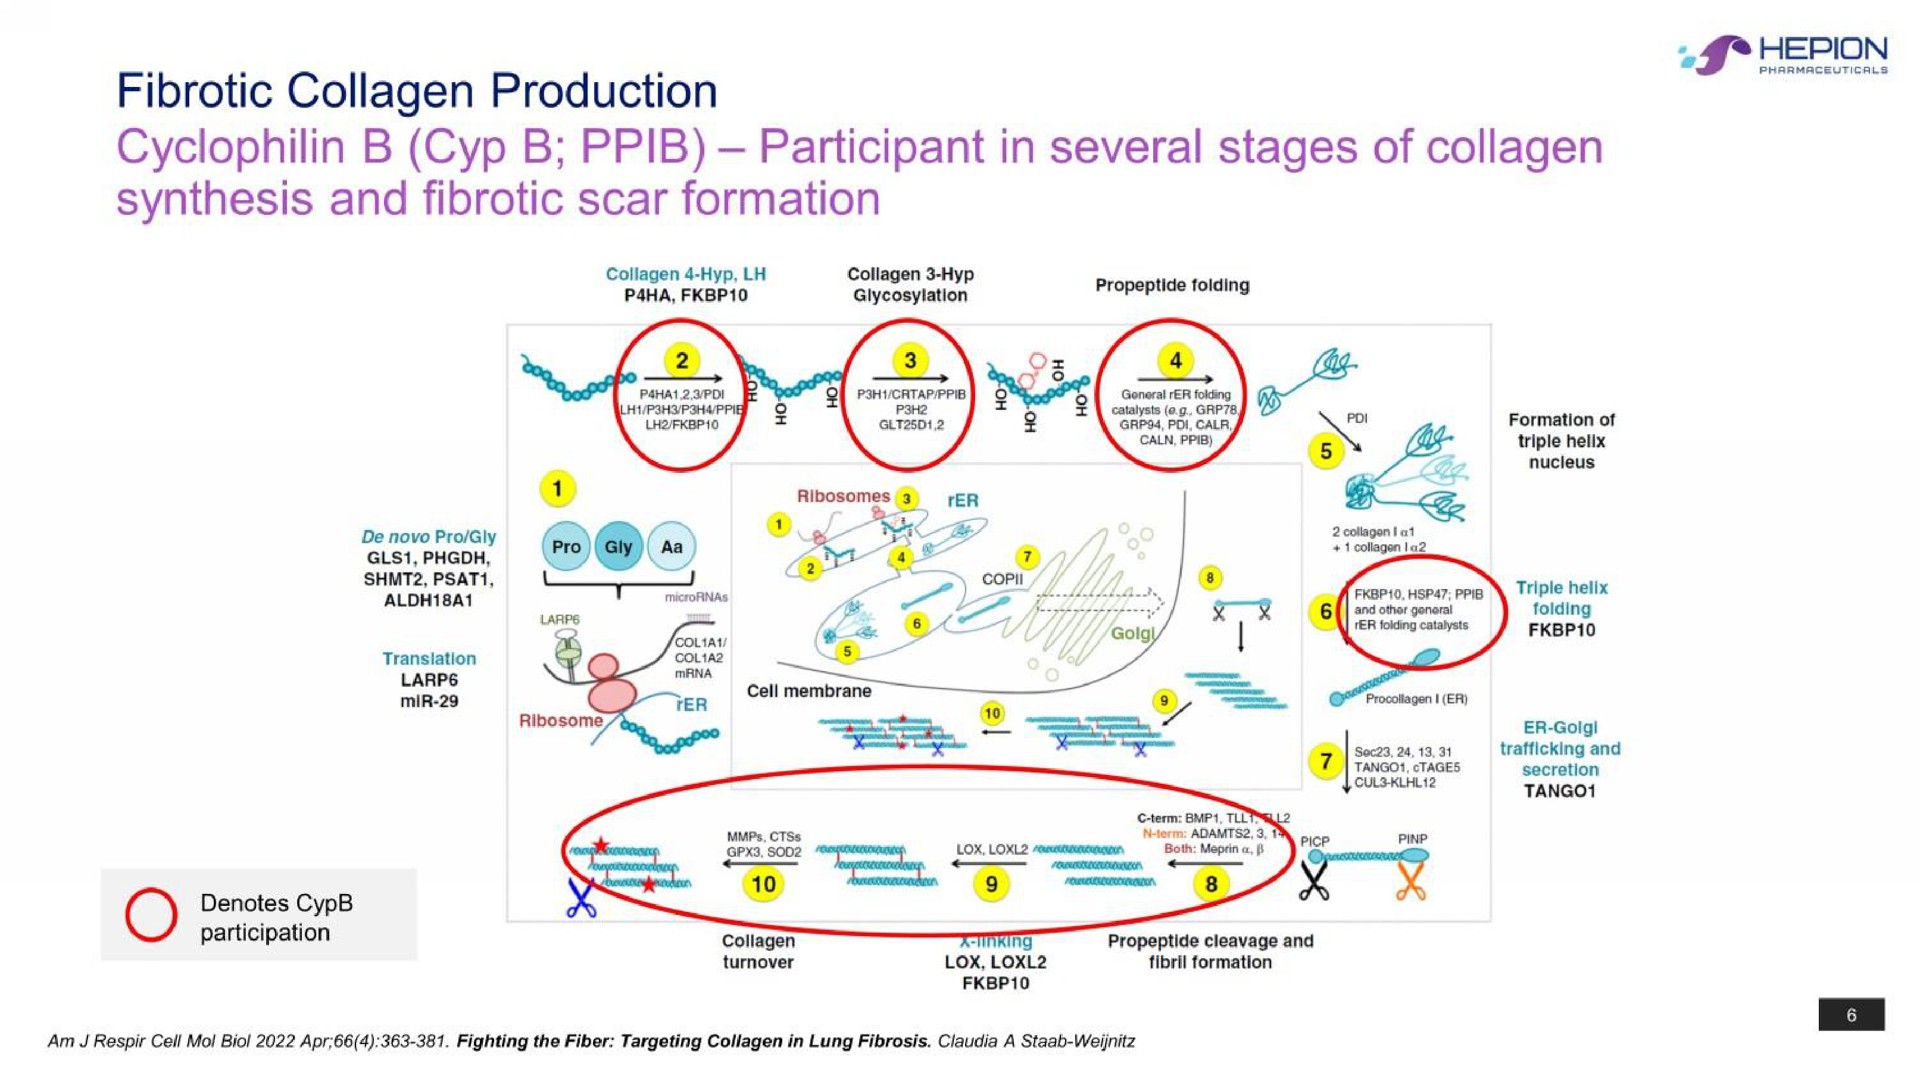 fibrotic collagen production cyp participant in several stages of collagen synthesis and fibrotic scar formation | Hepion Pharmaceuticals